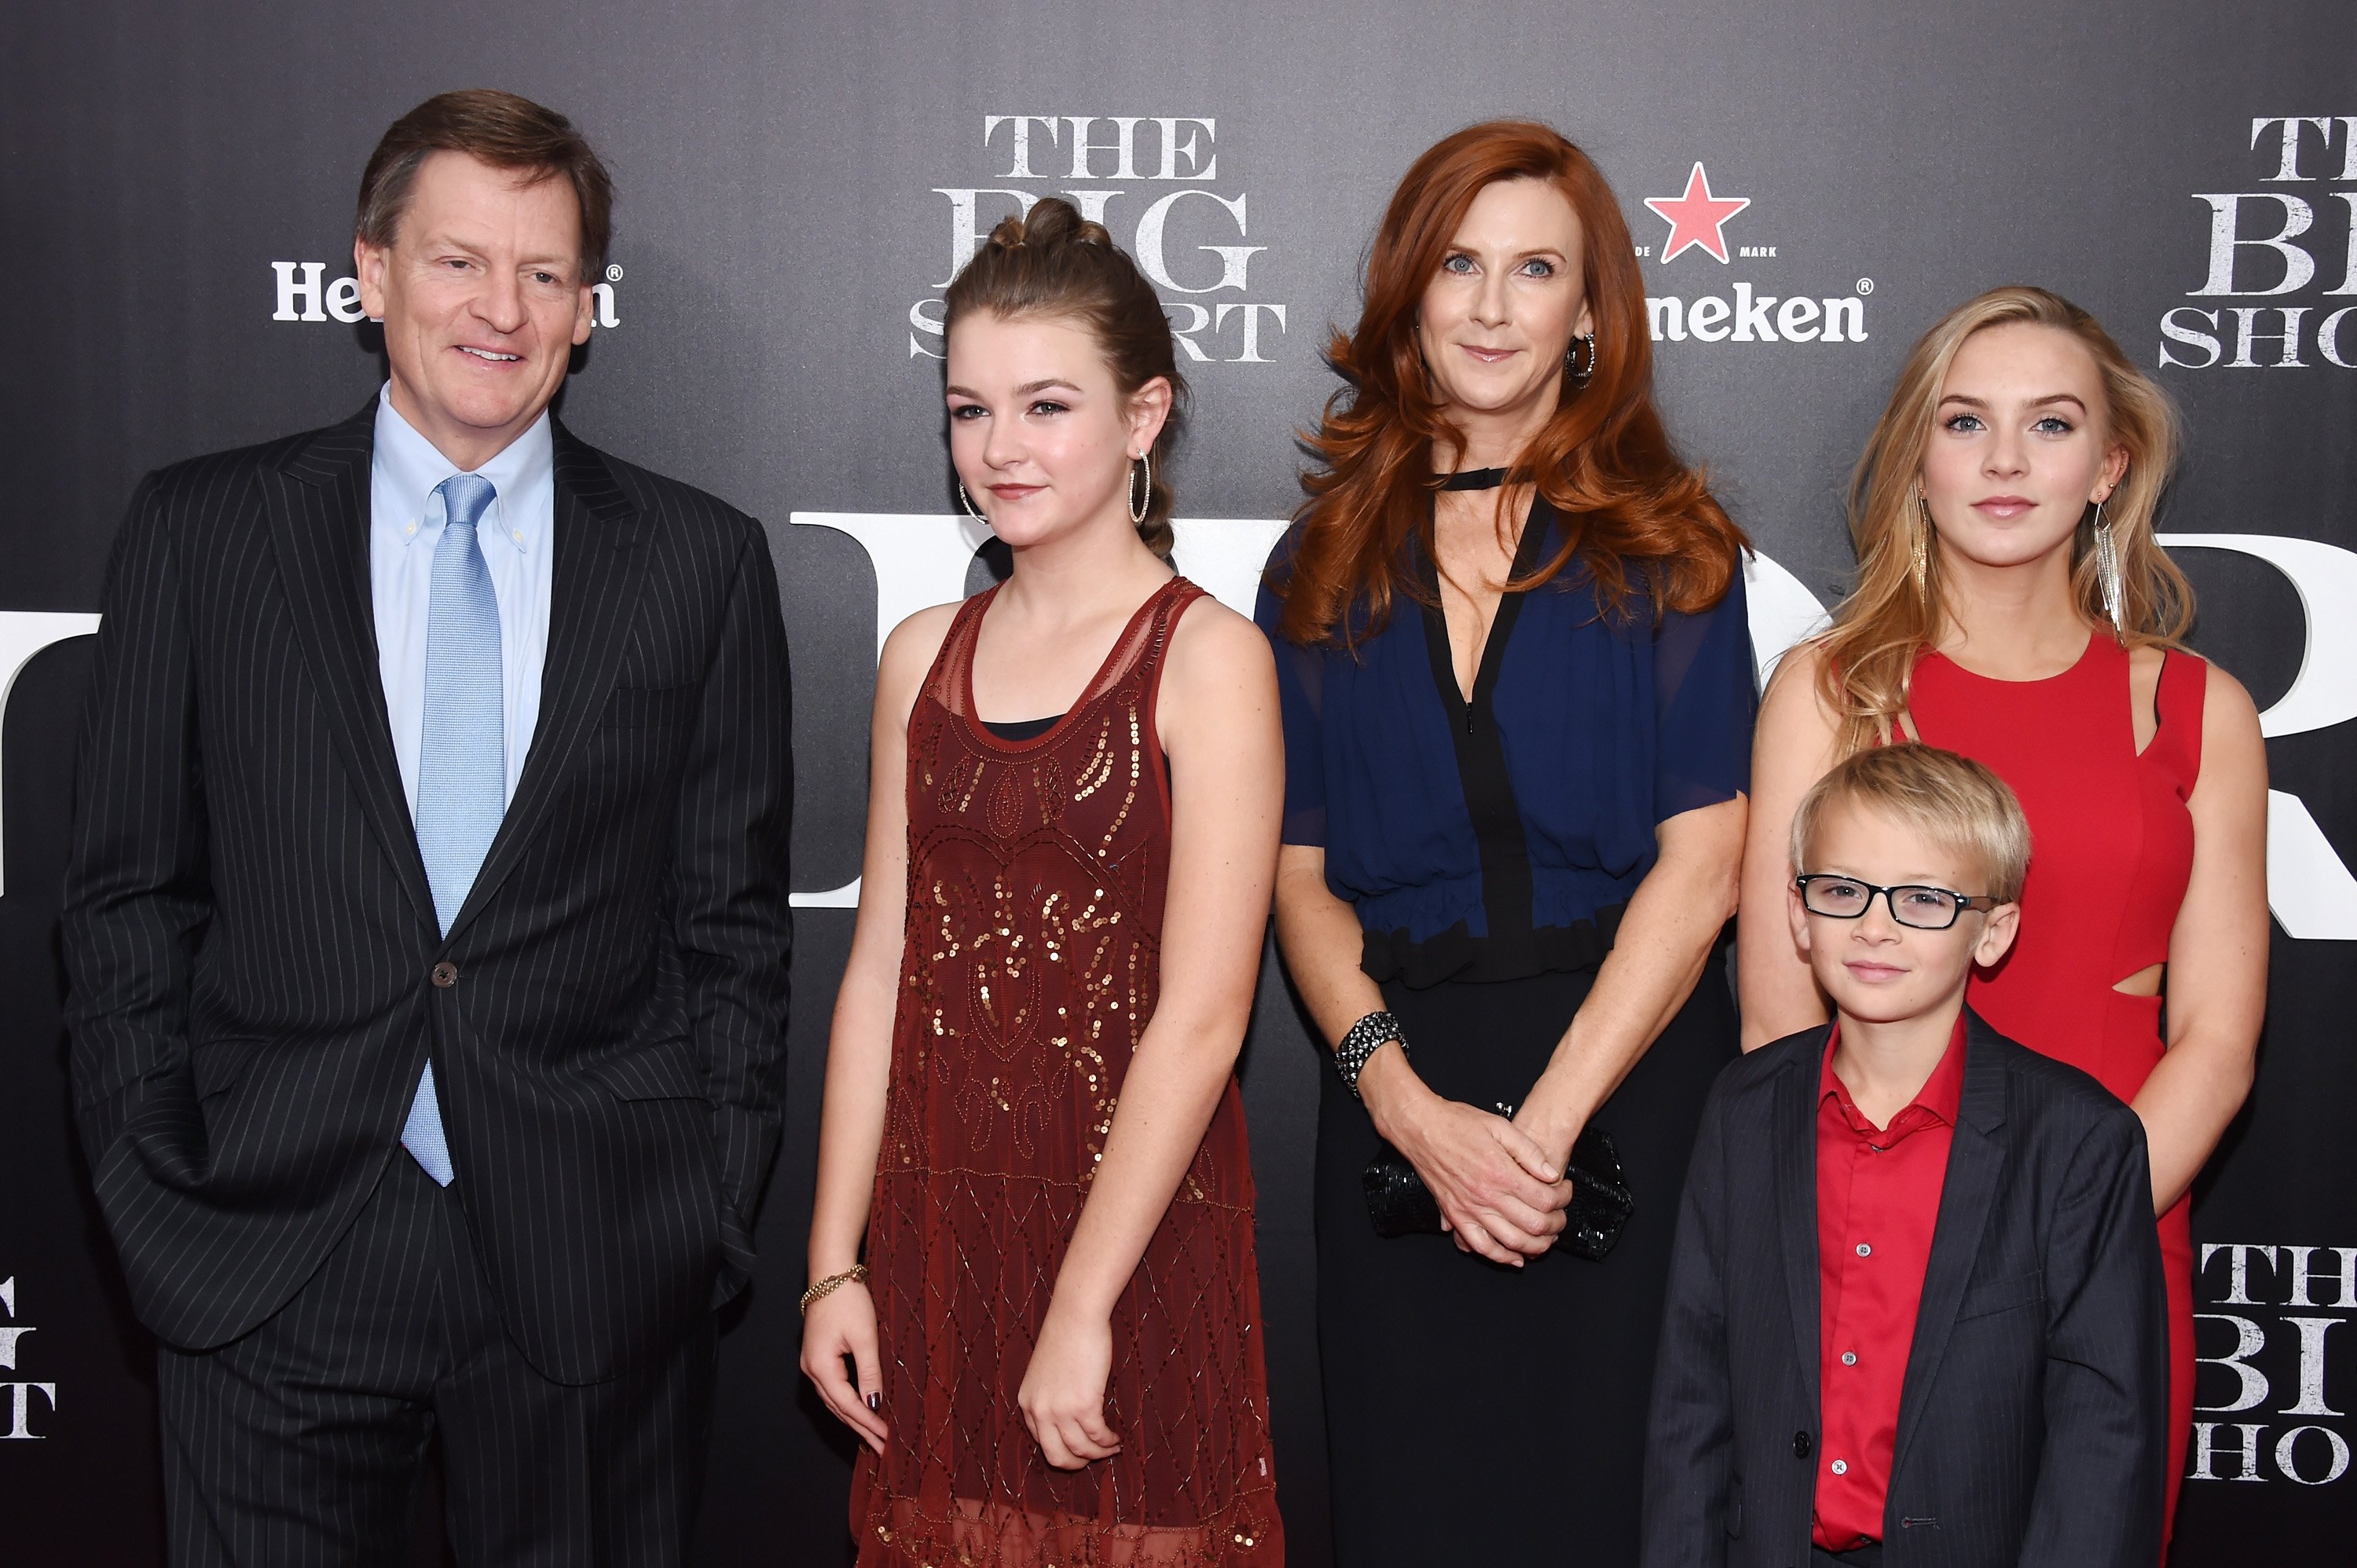 Michael Lewis, Dixie Lewis, Tabitha Soren, Walker Jack Lewis, and Quinn Tallulah Lewis attend the premiere of "The Big Short" at Ziegfeld Theatre on November 23, 2015 in New York City | Photo: Getty Images